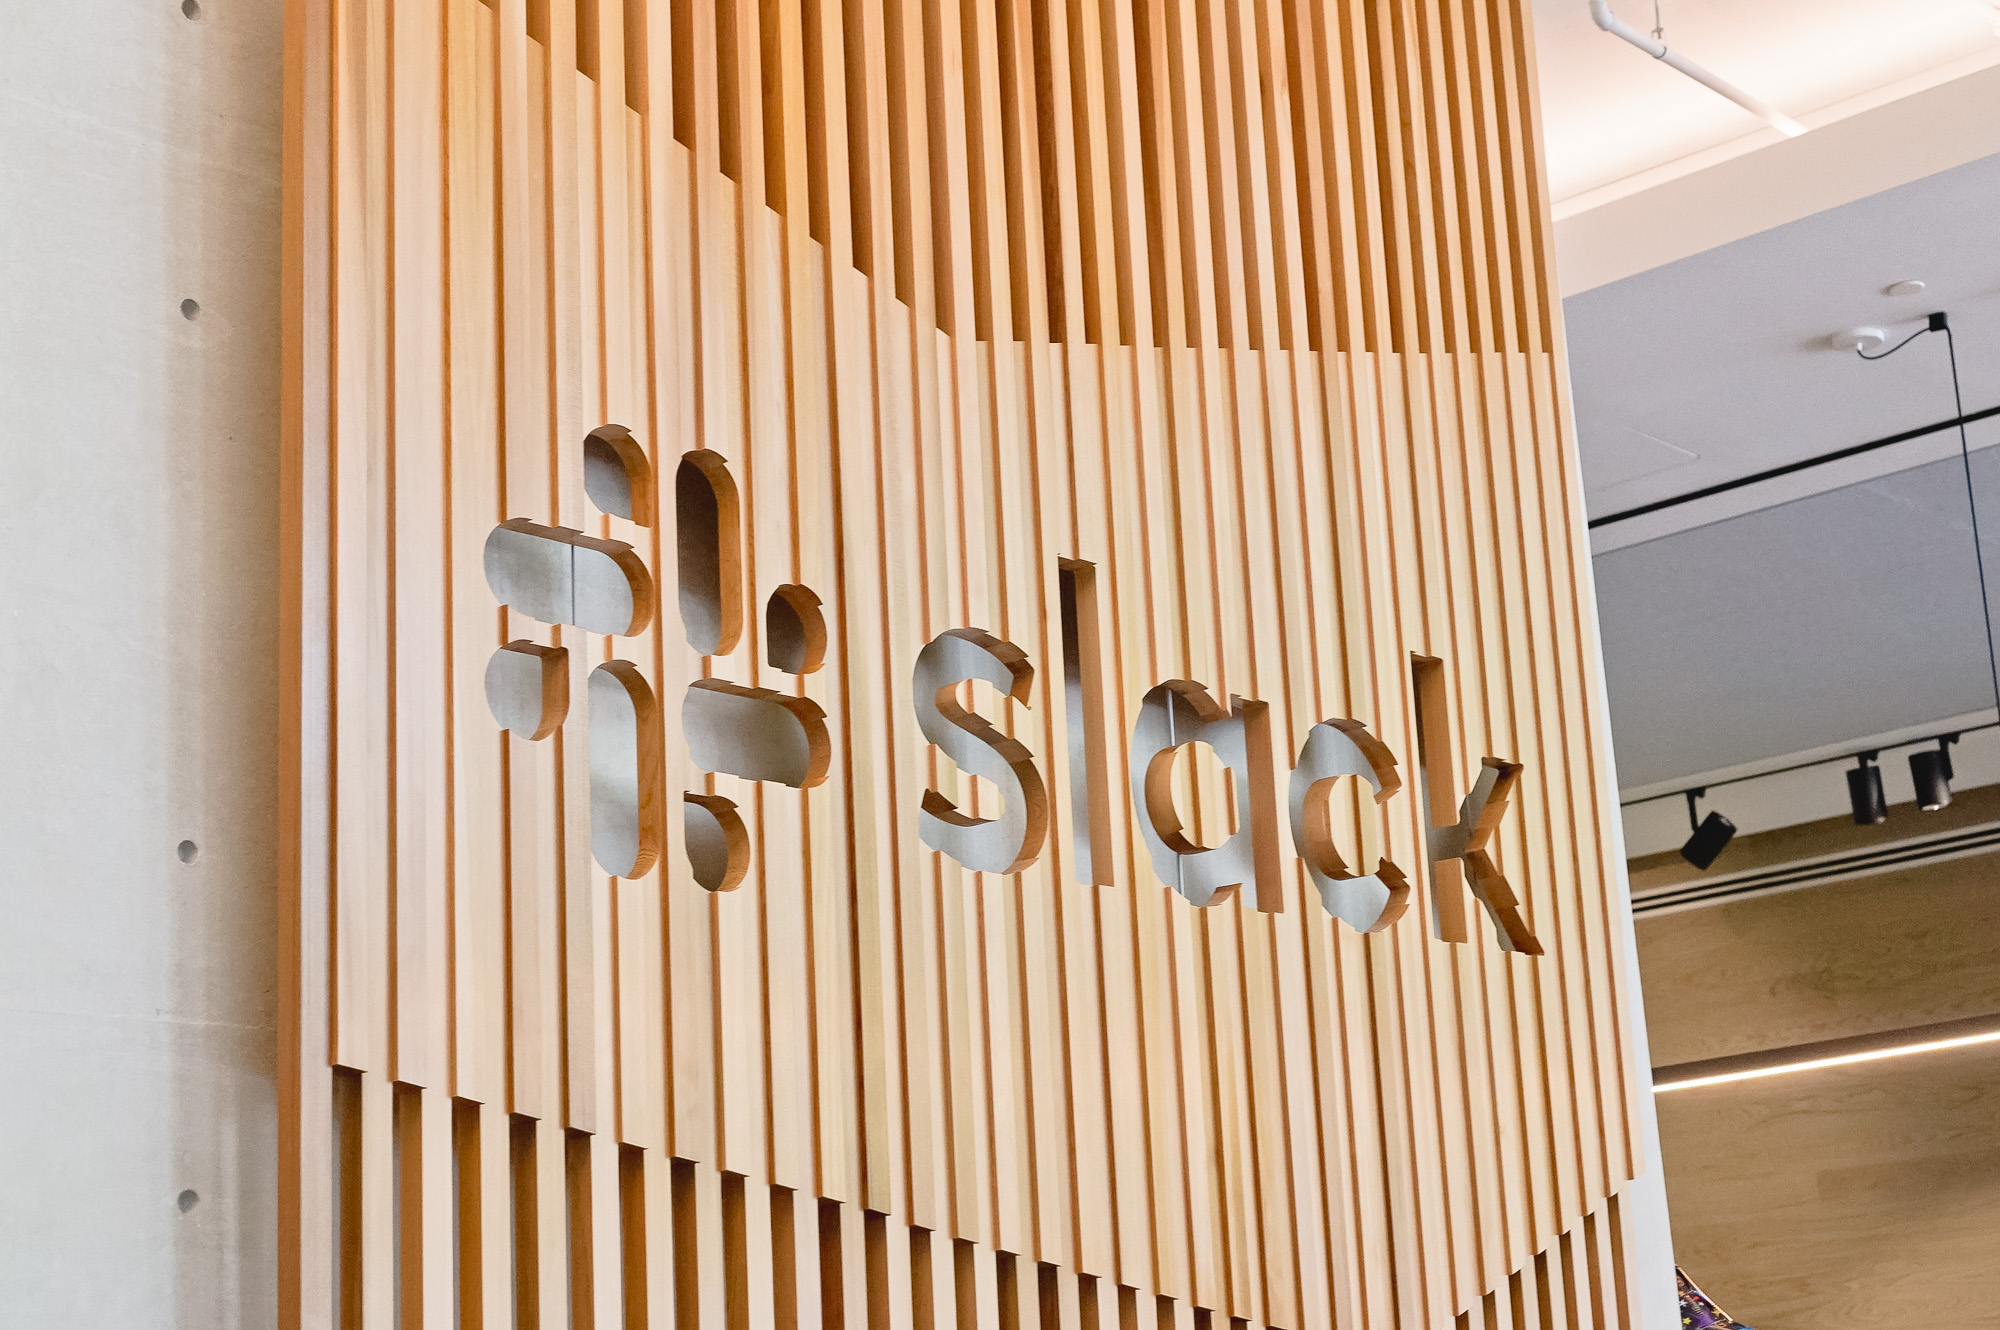 Modern, large-scale slat wood lobby sign on concrete wall at the San Francisco lobby of Slack, an American cloud-based set of team collaboration tools and services.